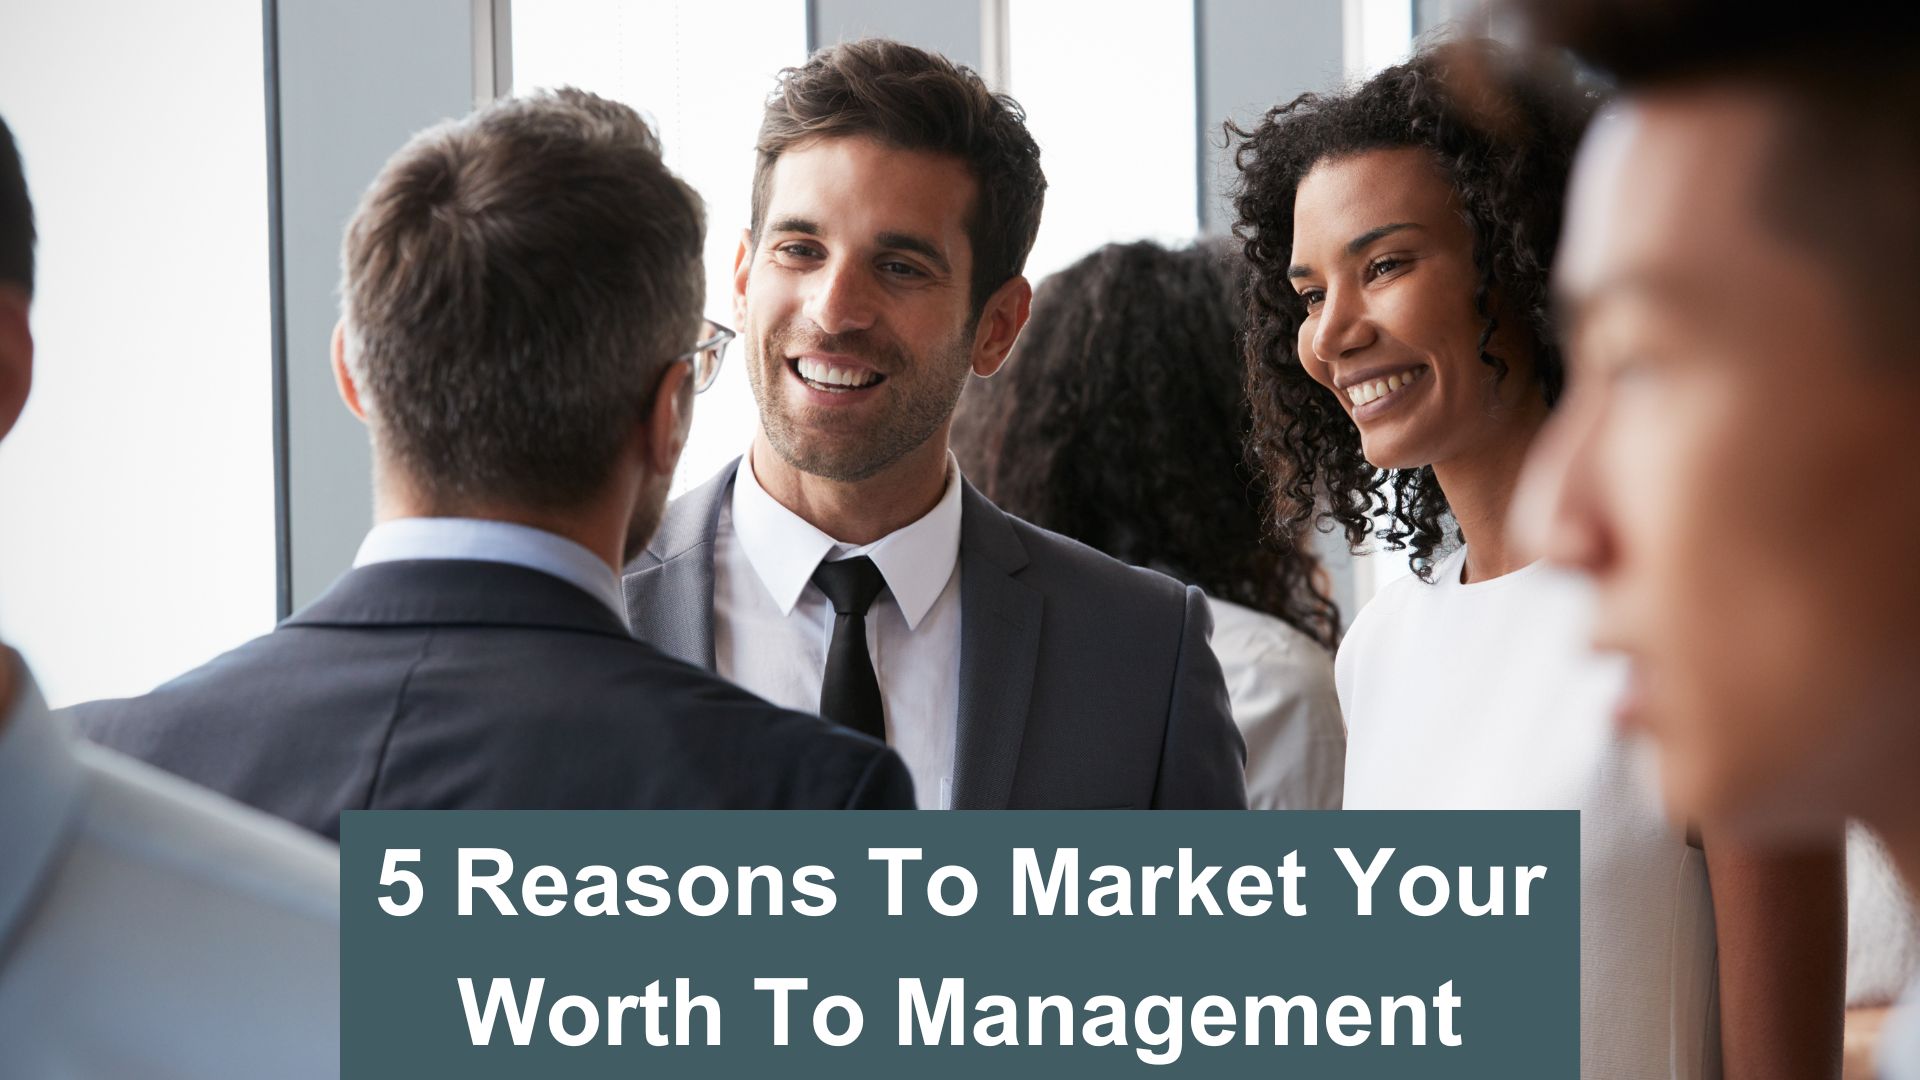 5 Reasons To Market Your Worth To Management